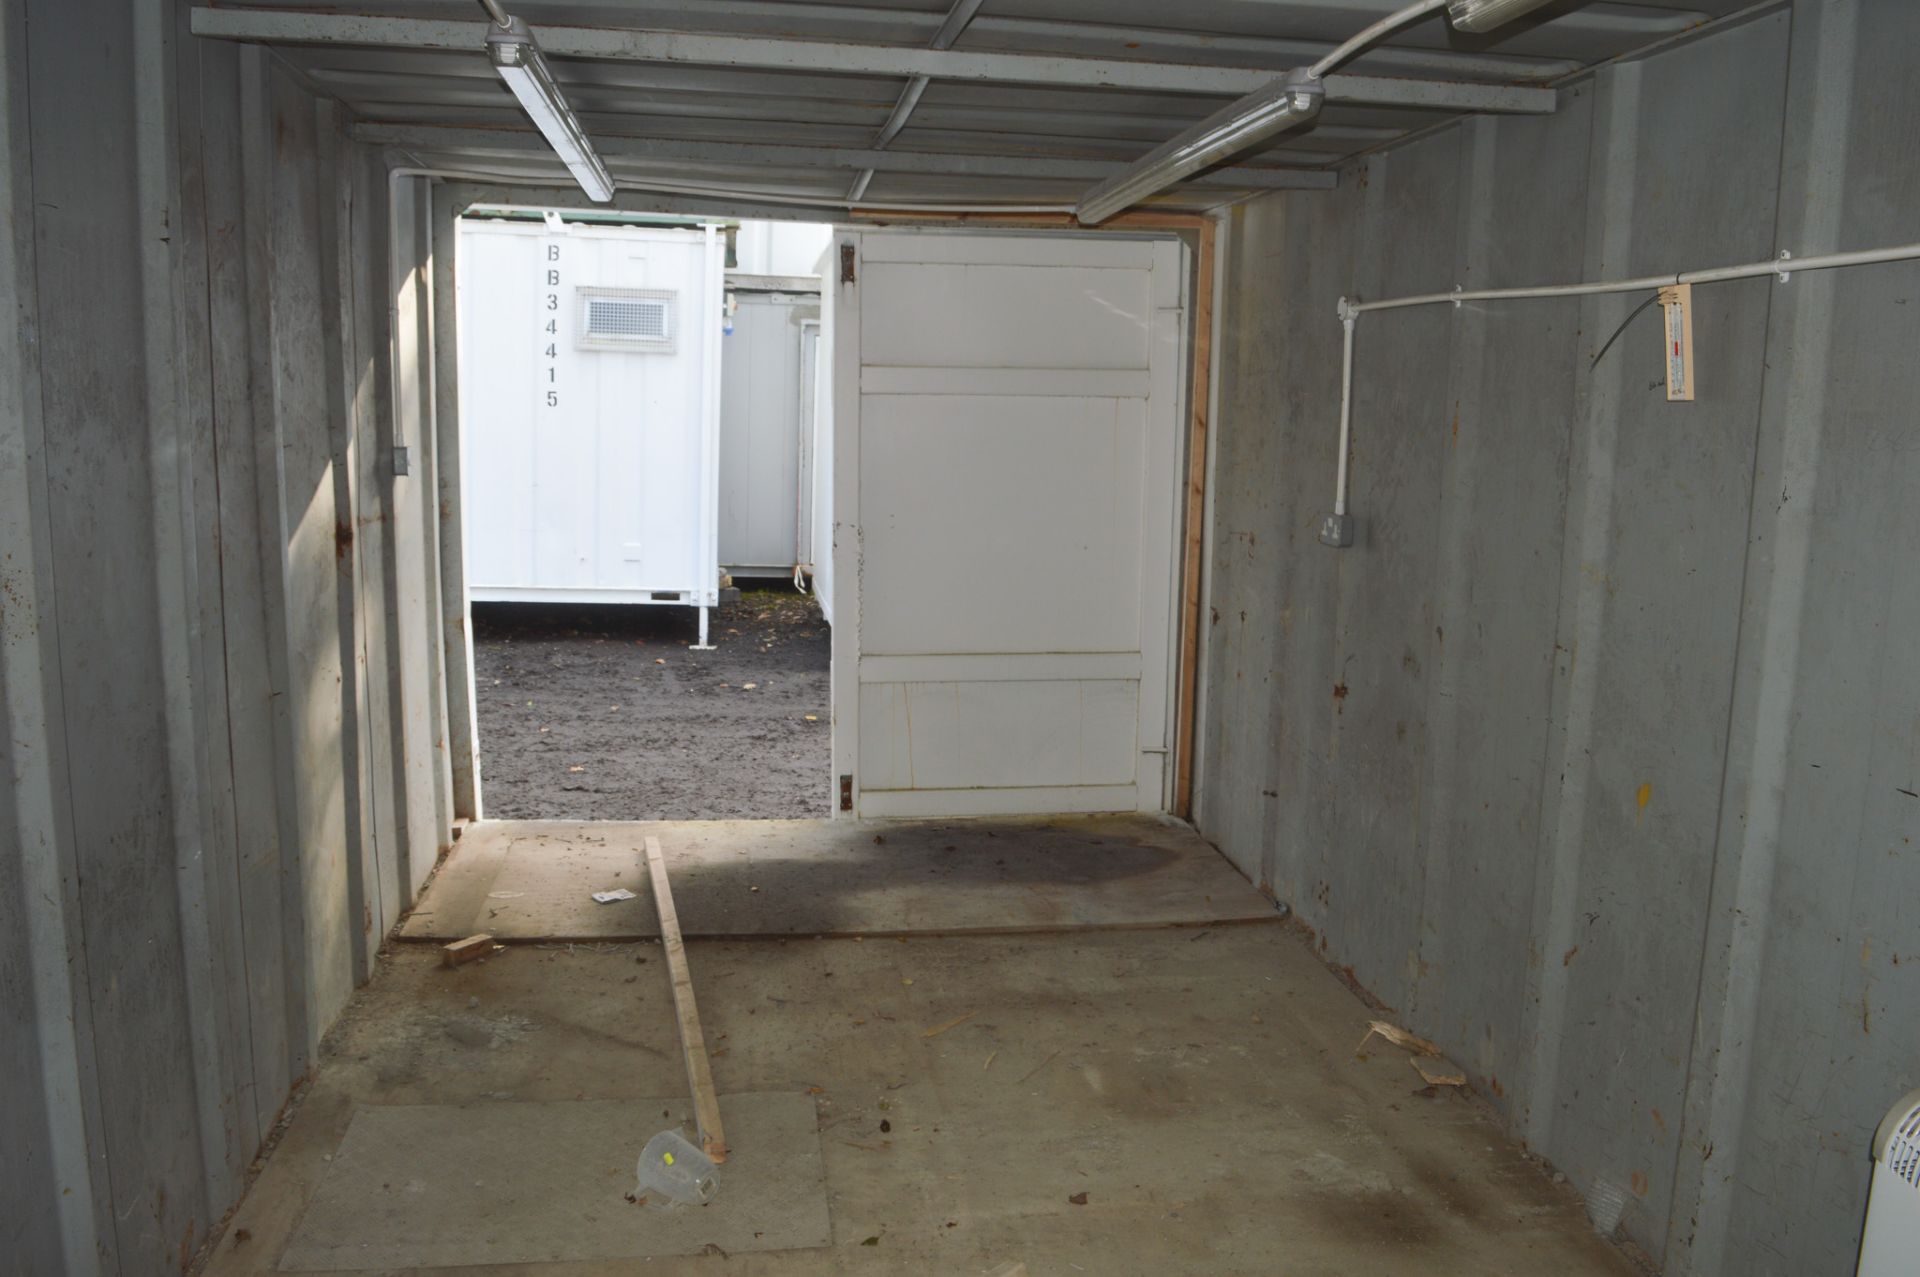 21 ft x 9 ft steel anti vandal shipping container  c/w keys in office  A508242 - Bild 6 aus 6